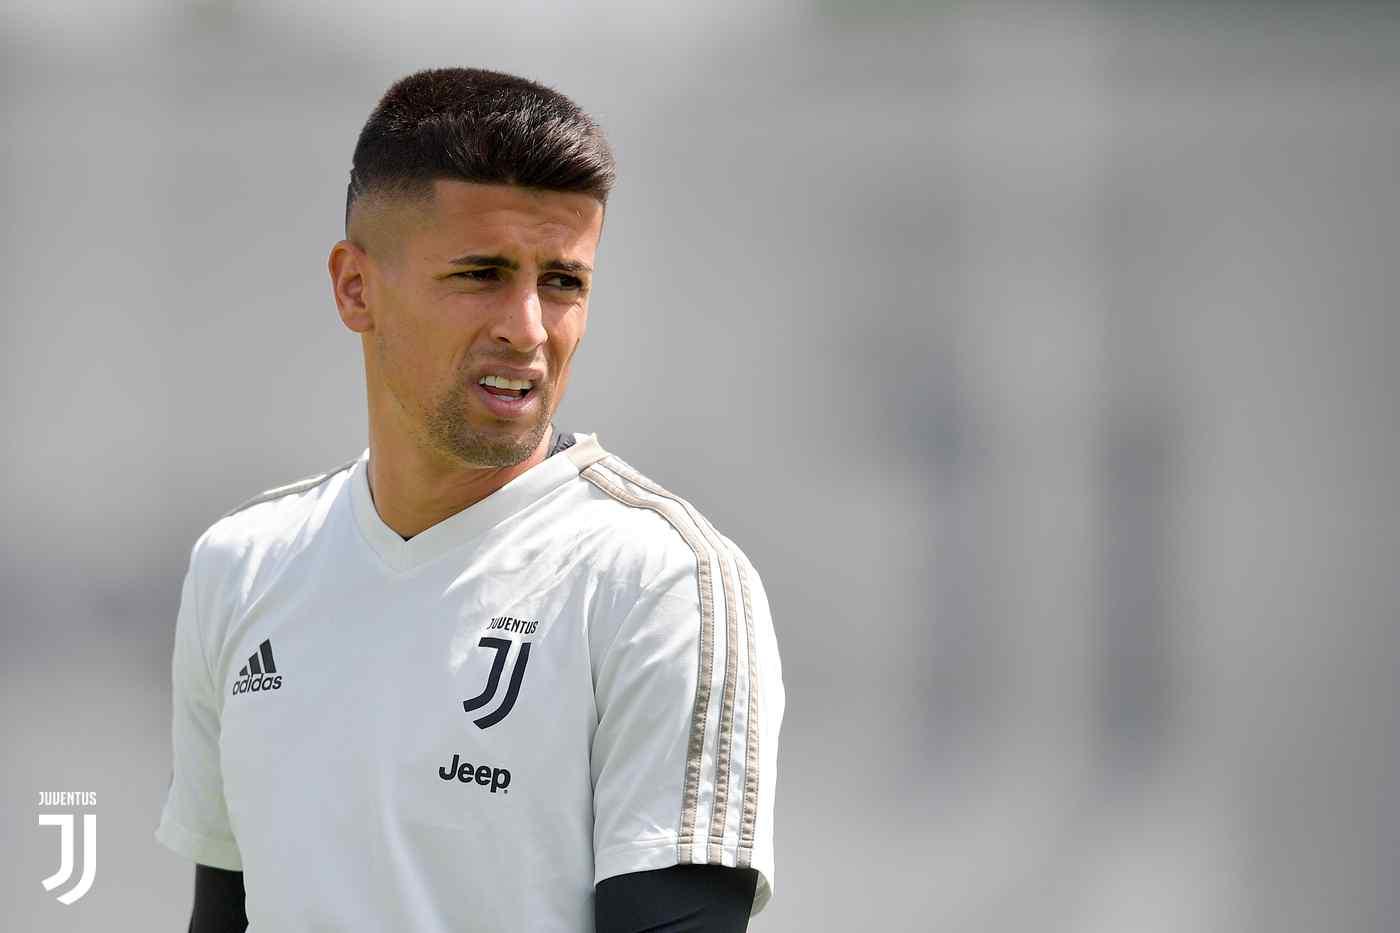 Successful operation for Cancelo